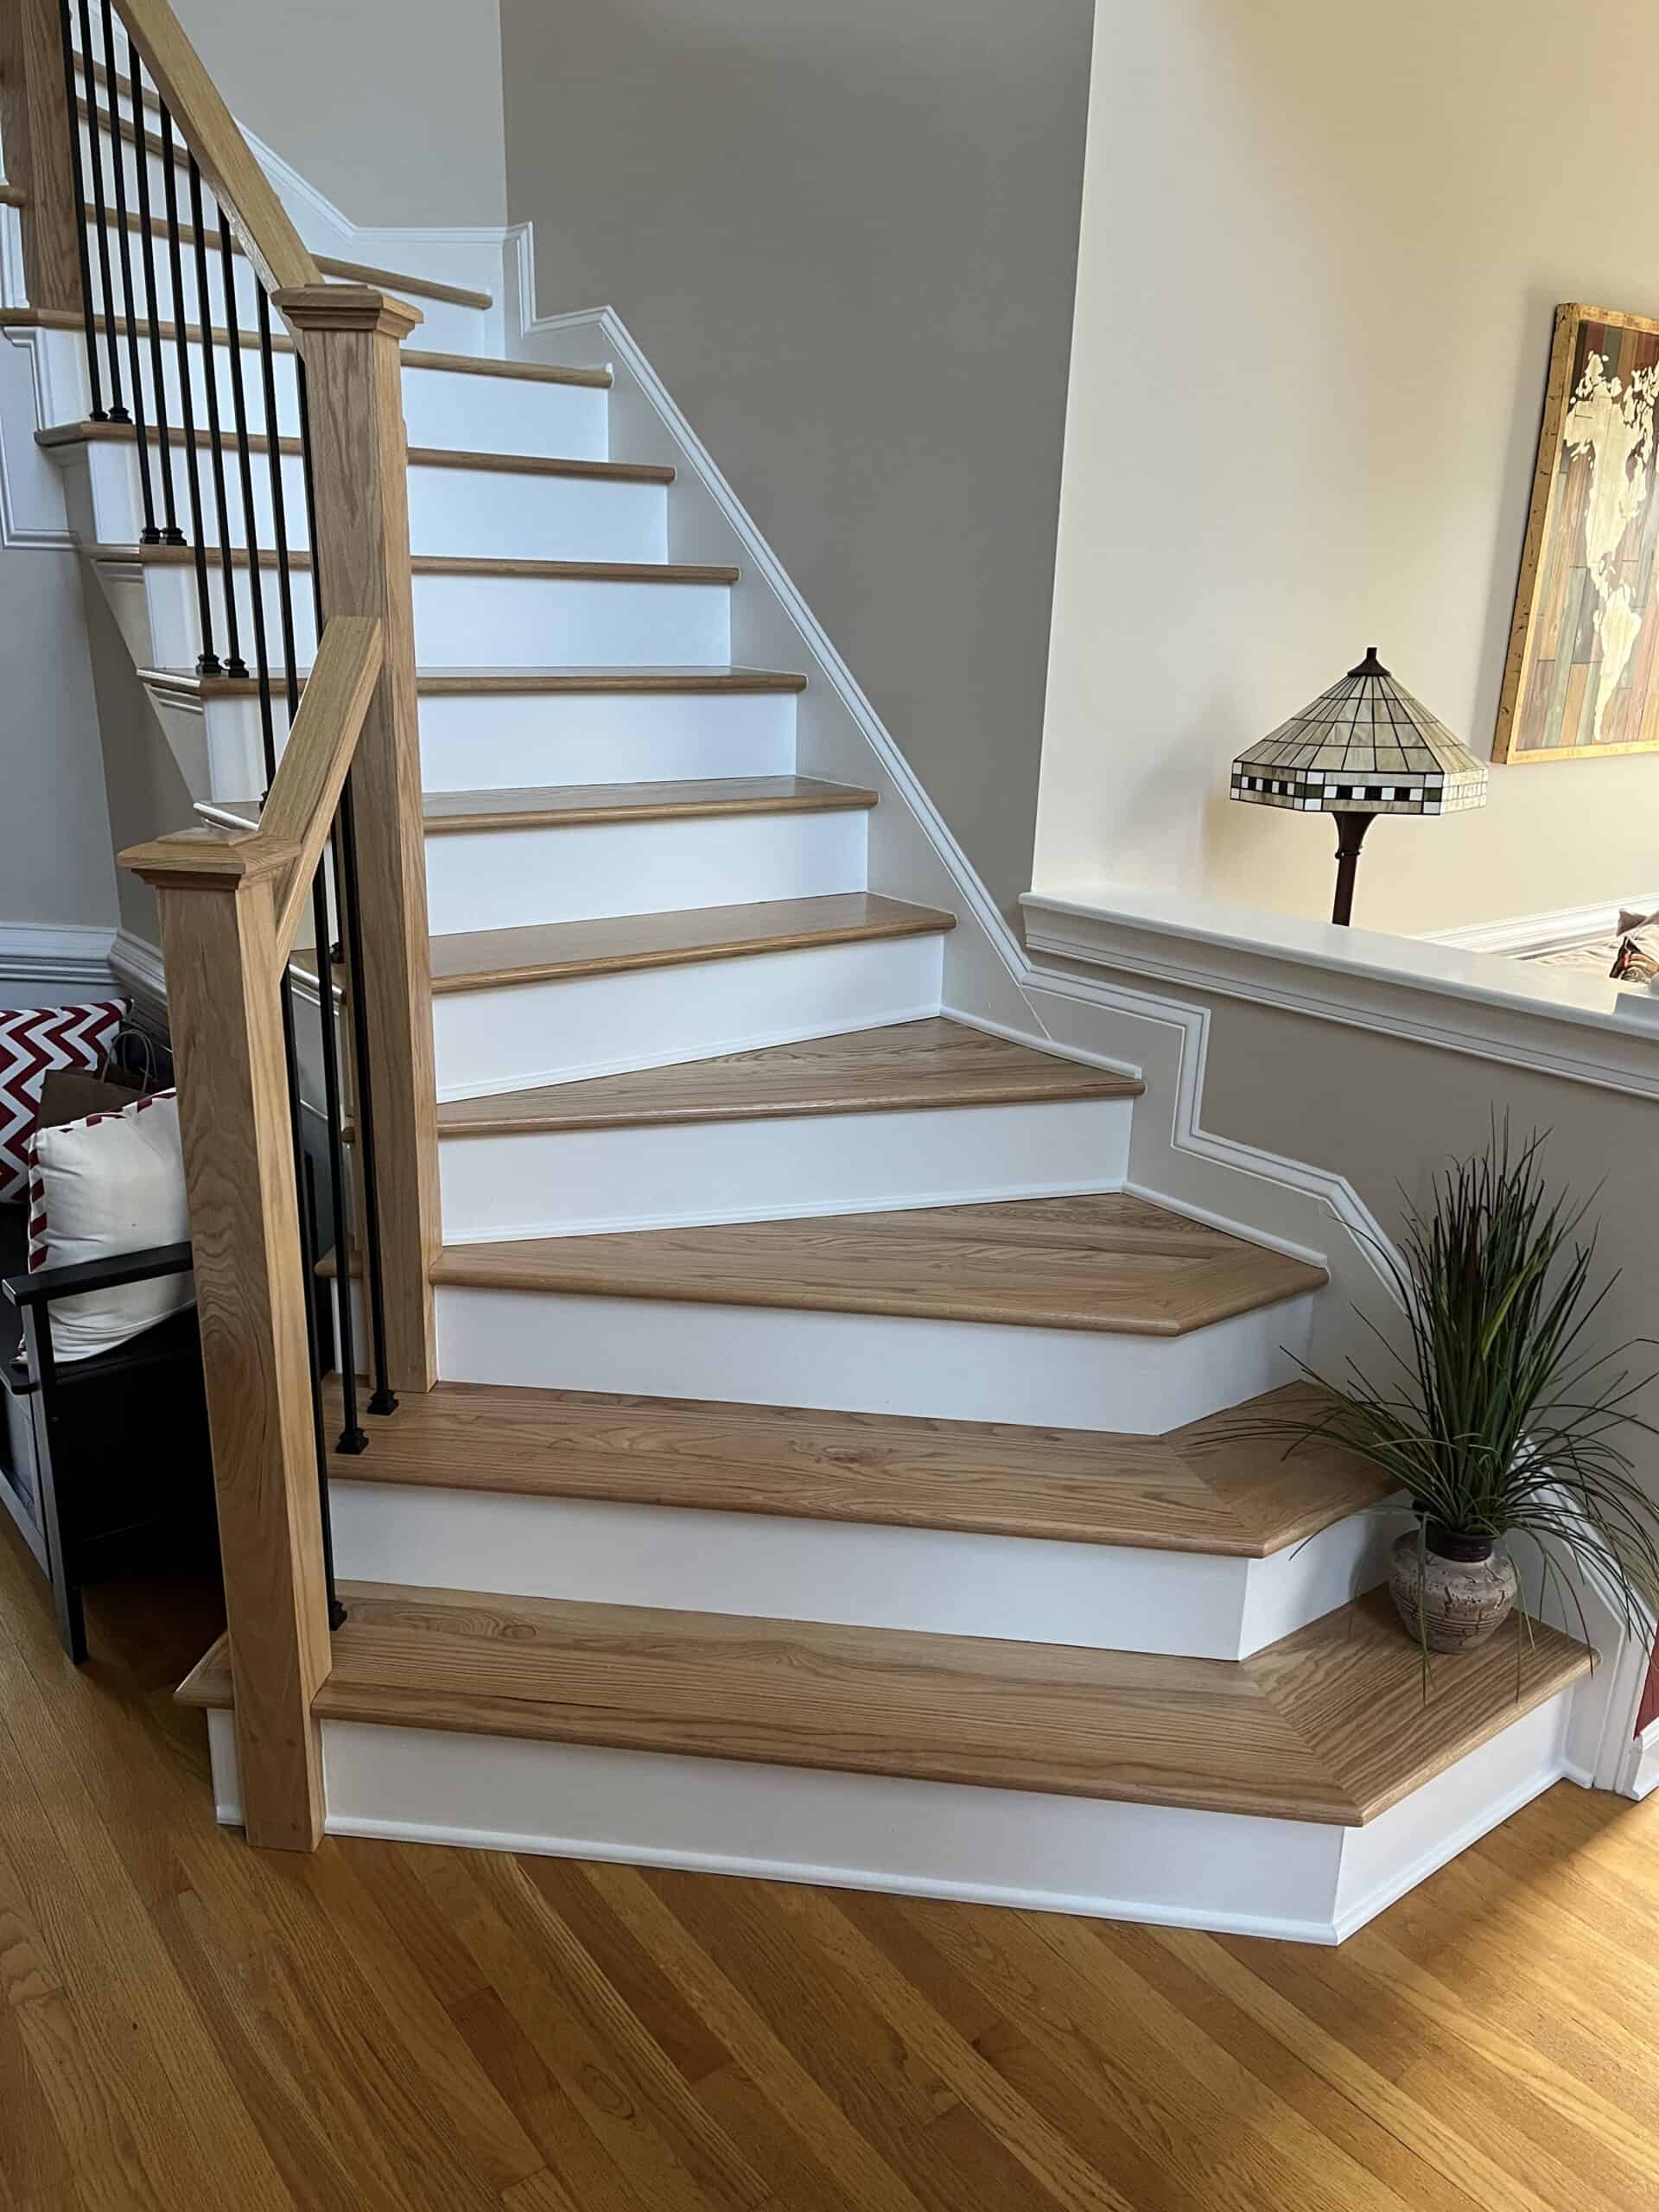 natural hardwood floors in cary nc. natural oak stair case and stair treads